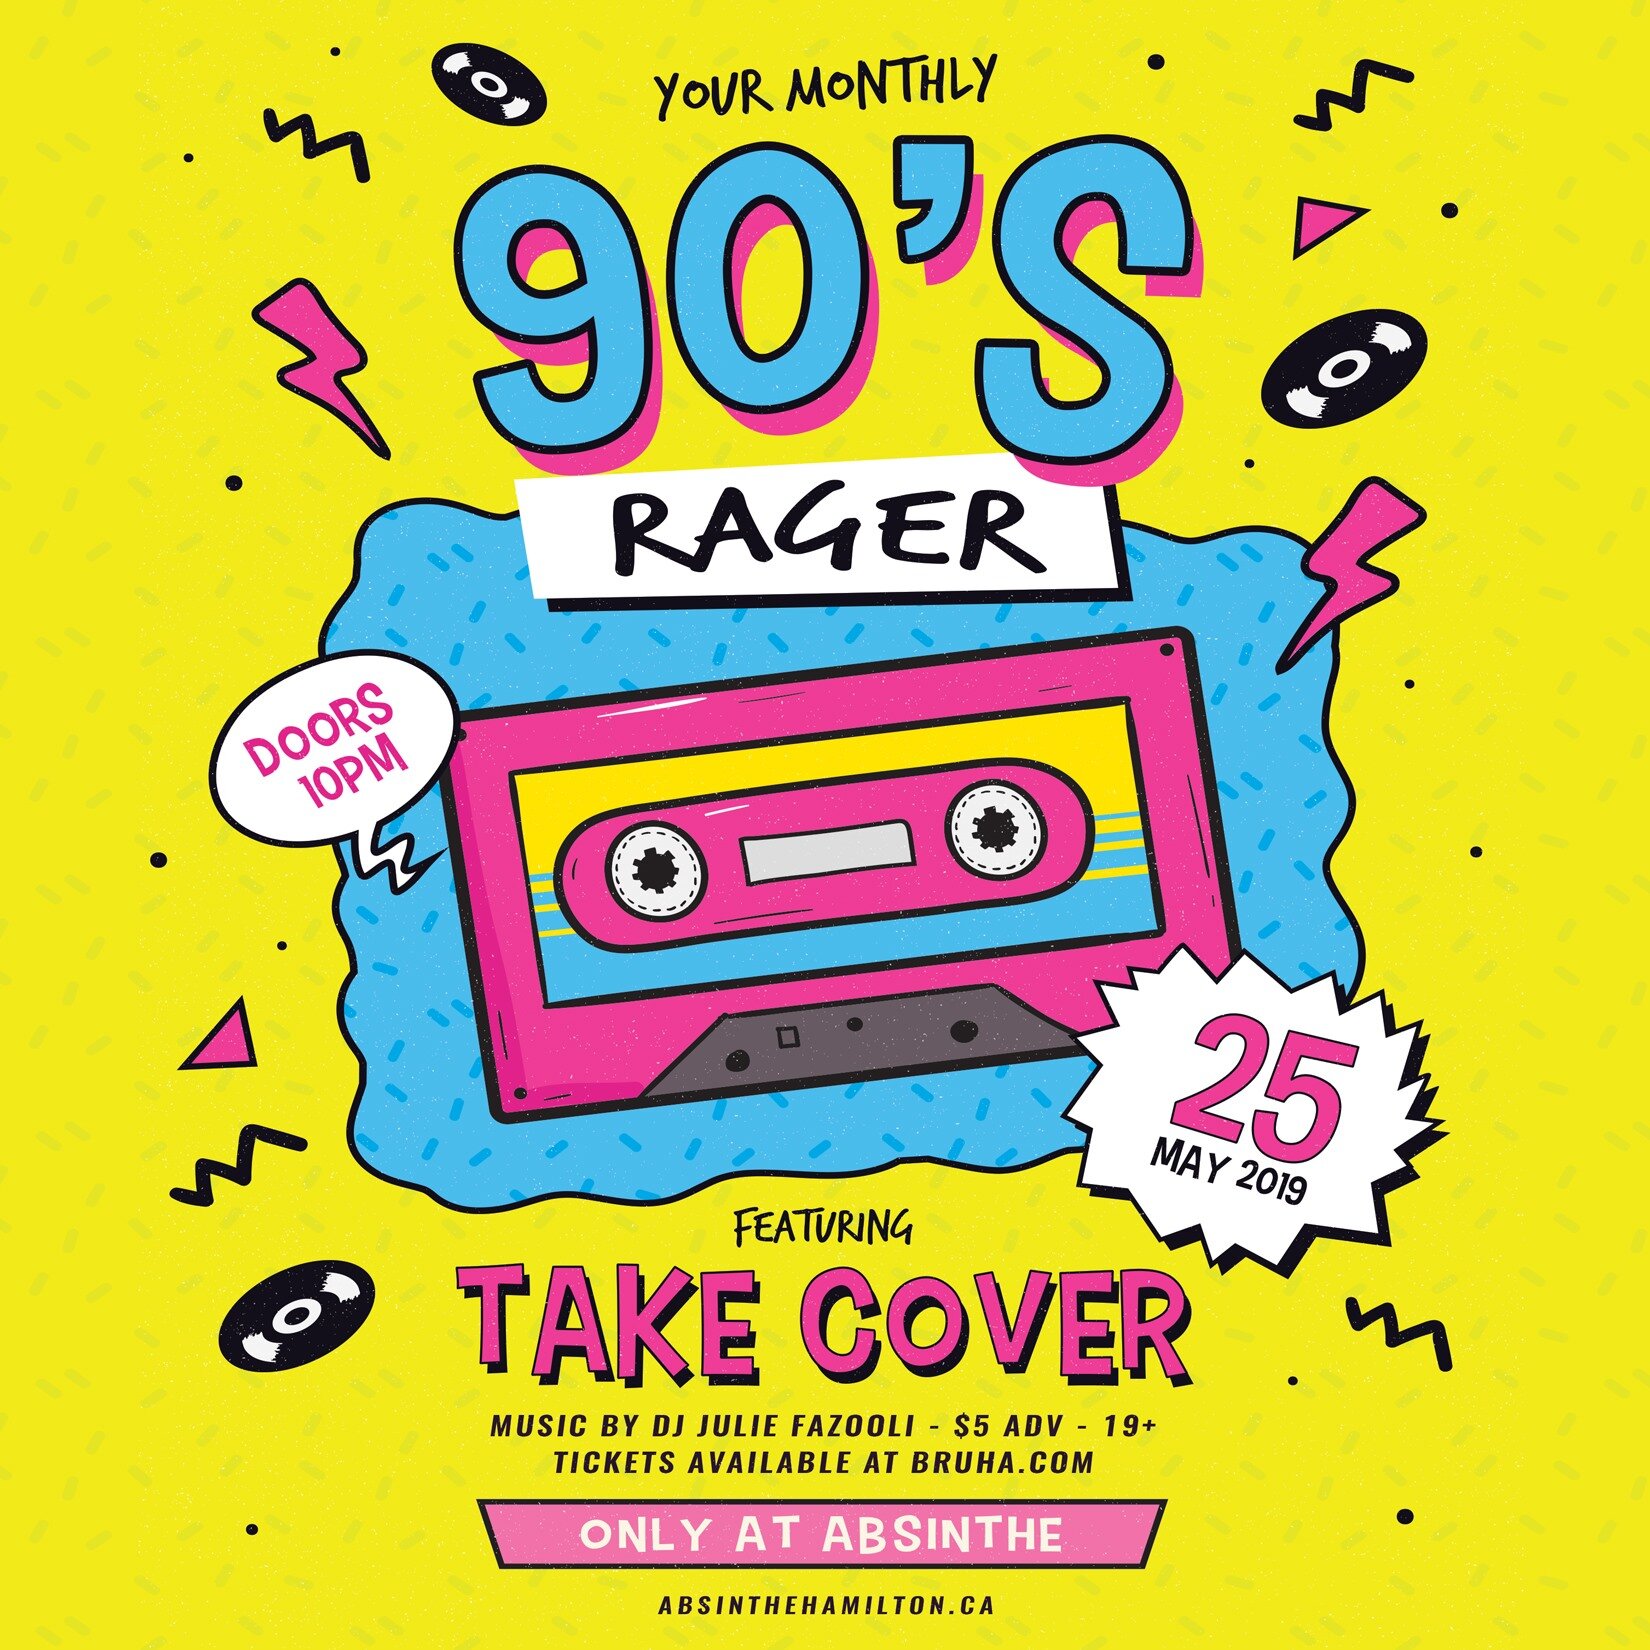 90'S RAGER MAY 25 2019 SQUARE.jpg